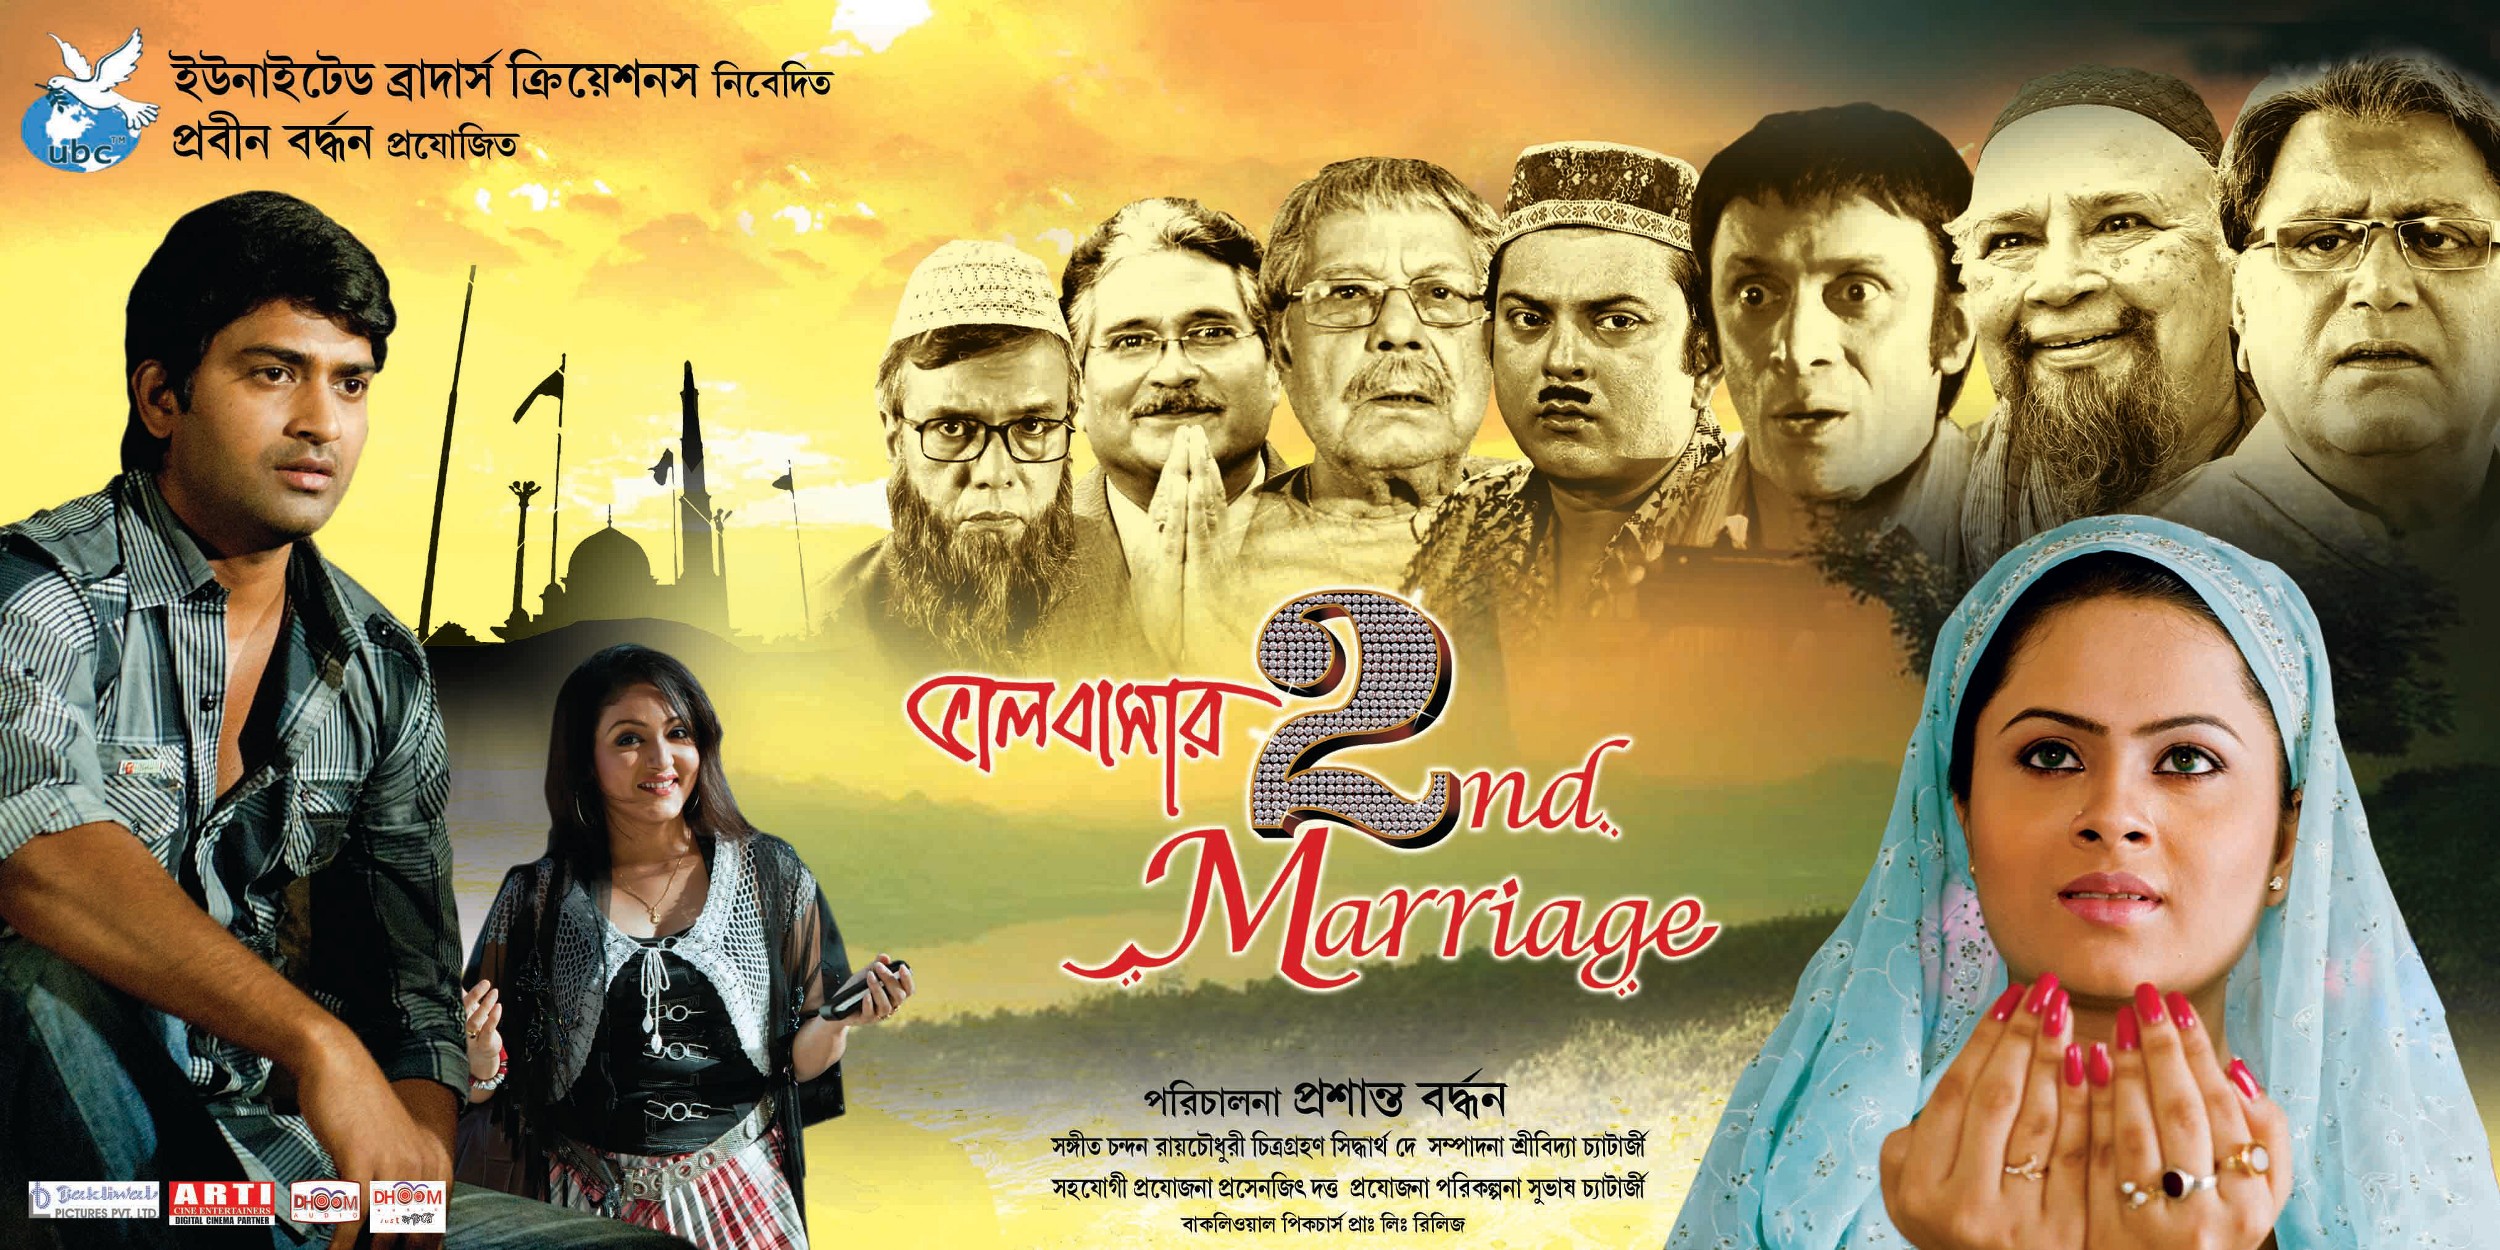 Mega Sized Movie Poster Image for Bhalobasar 2nd Marriage (#4 of 6)